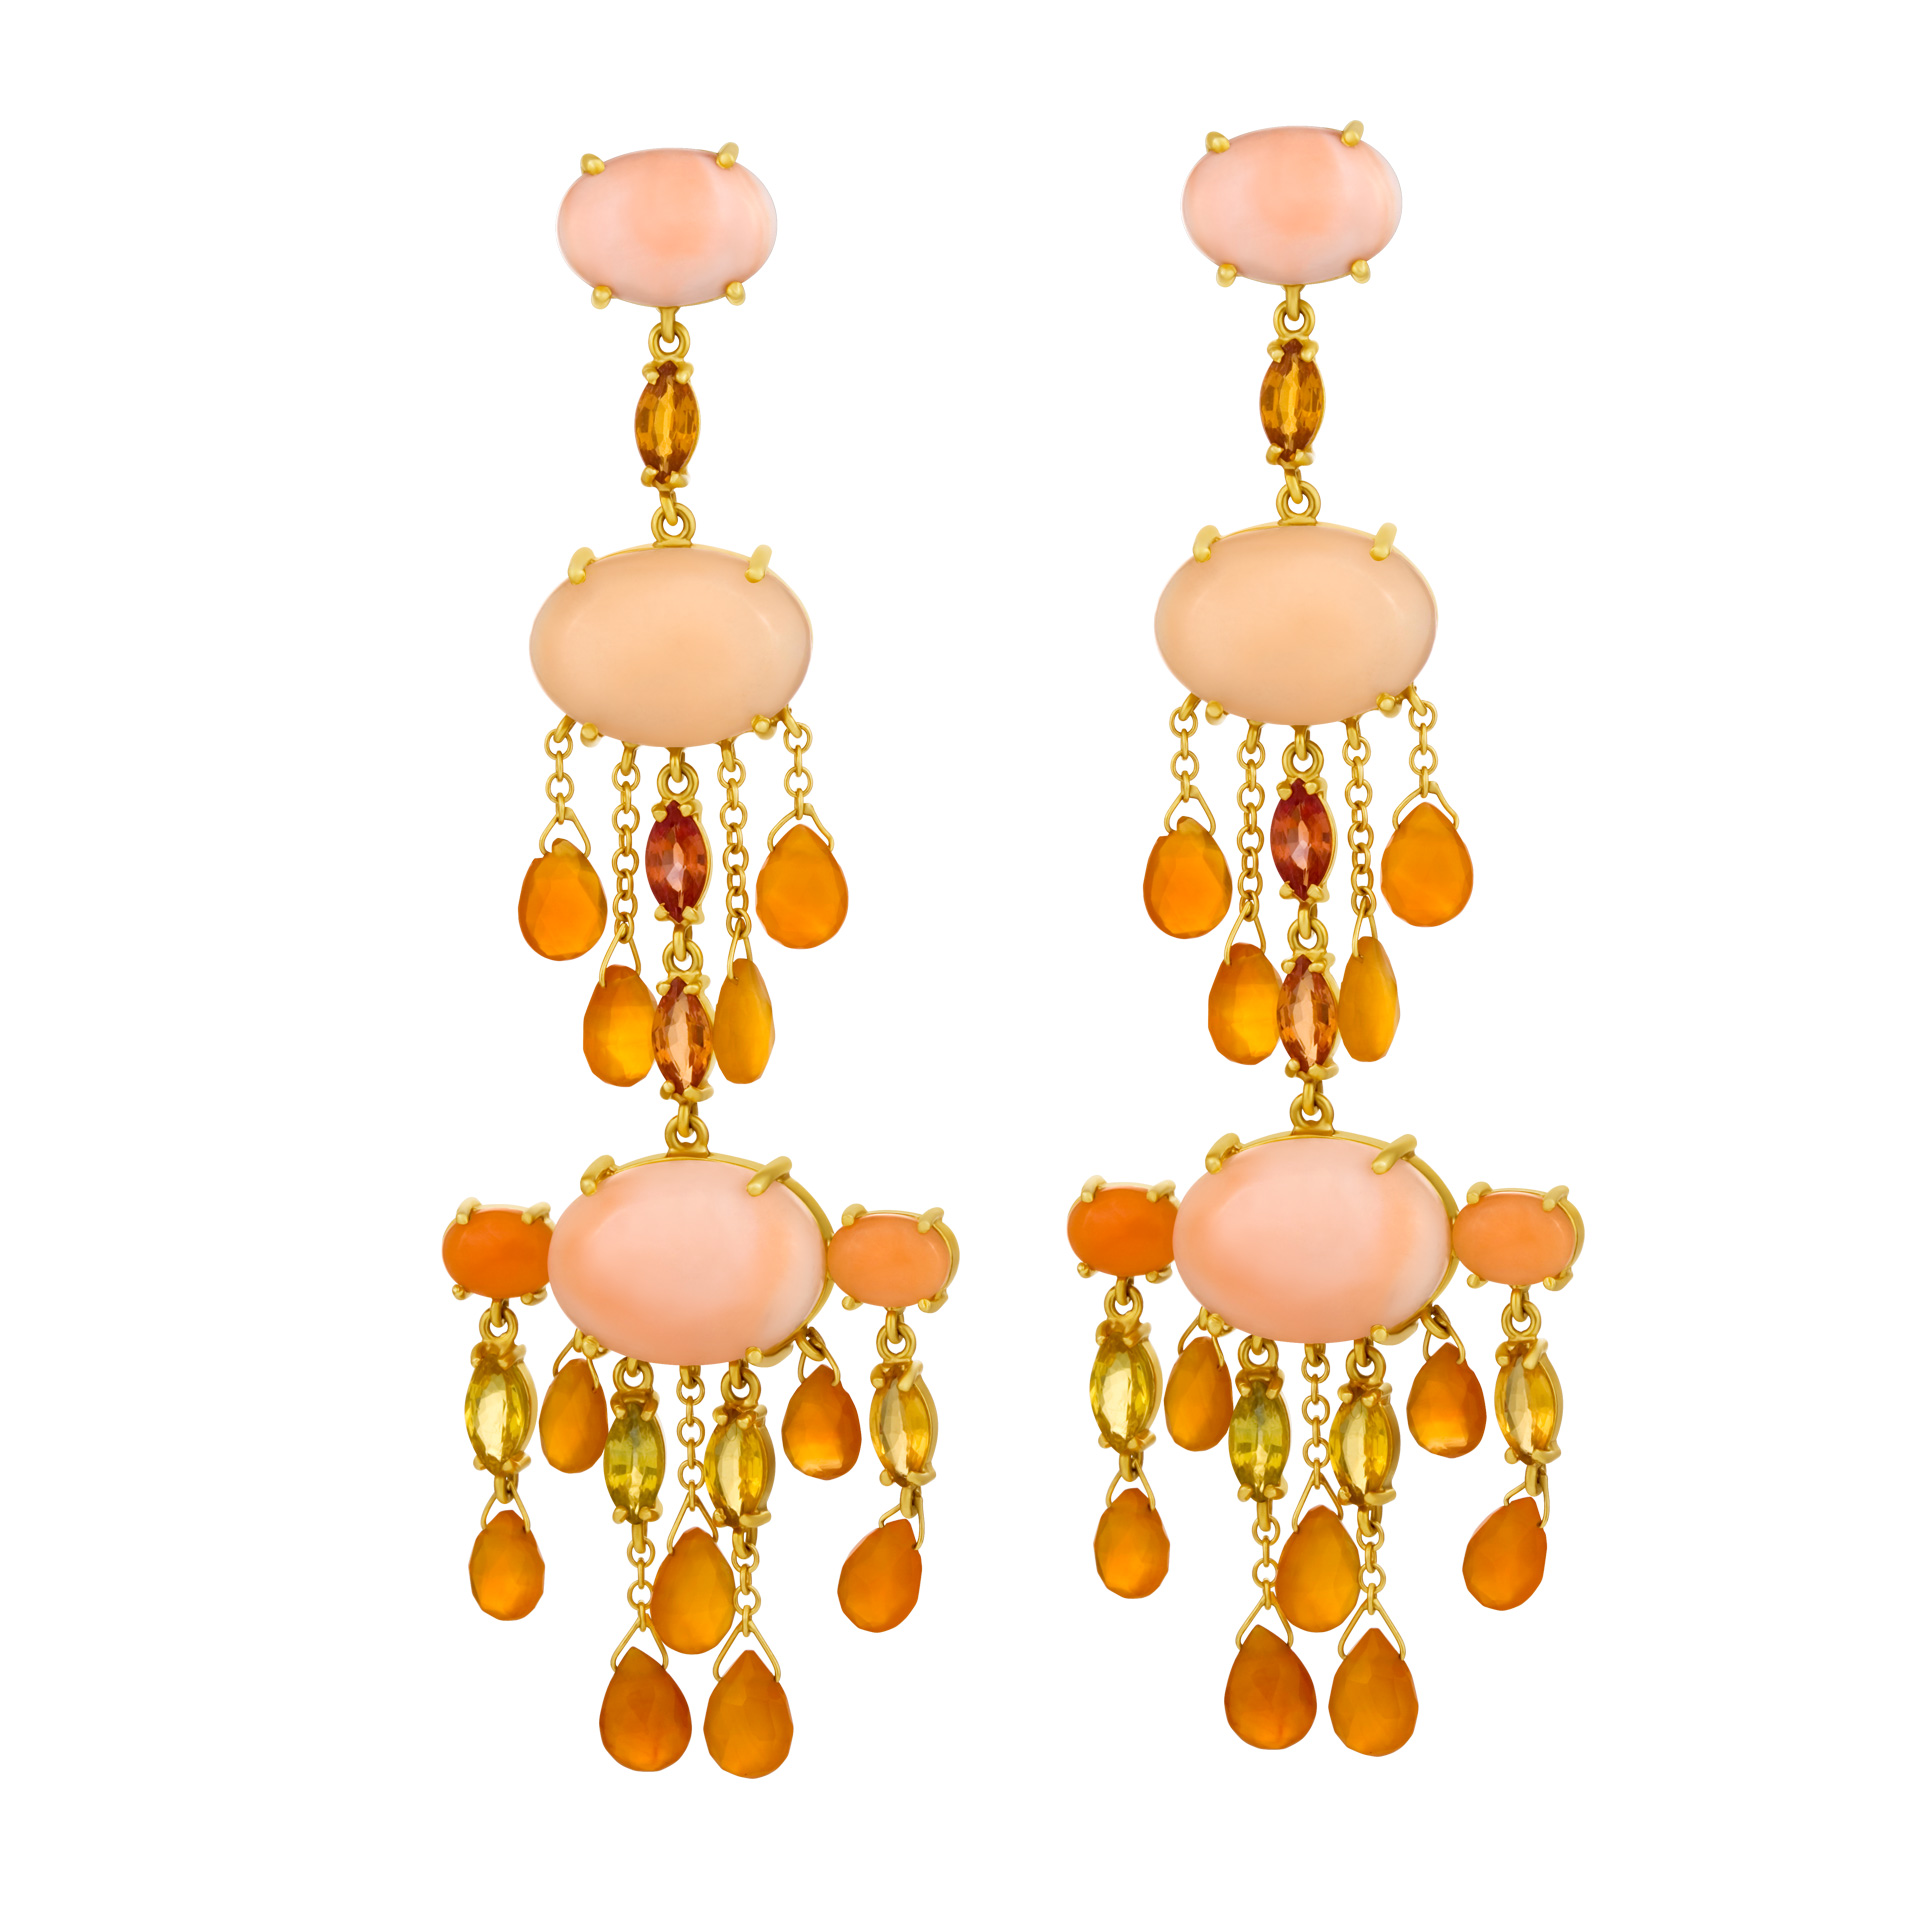 Coral dangle 18k earrings with cornelians and yellow citrins